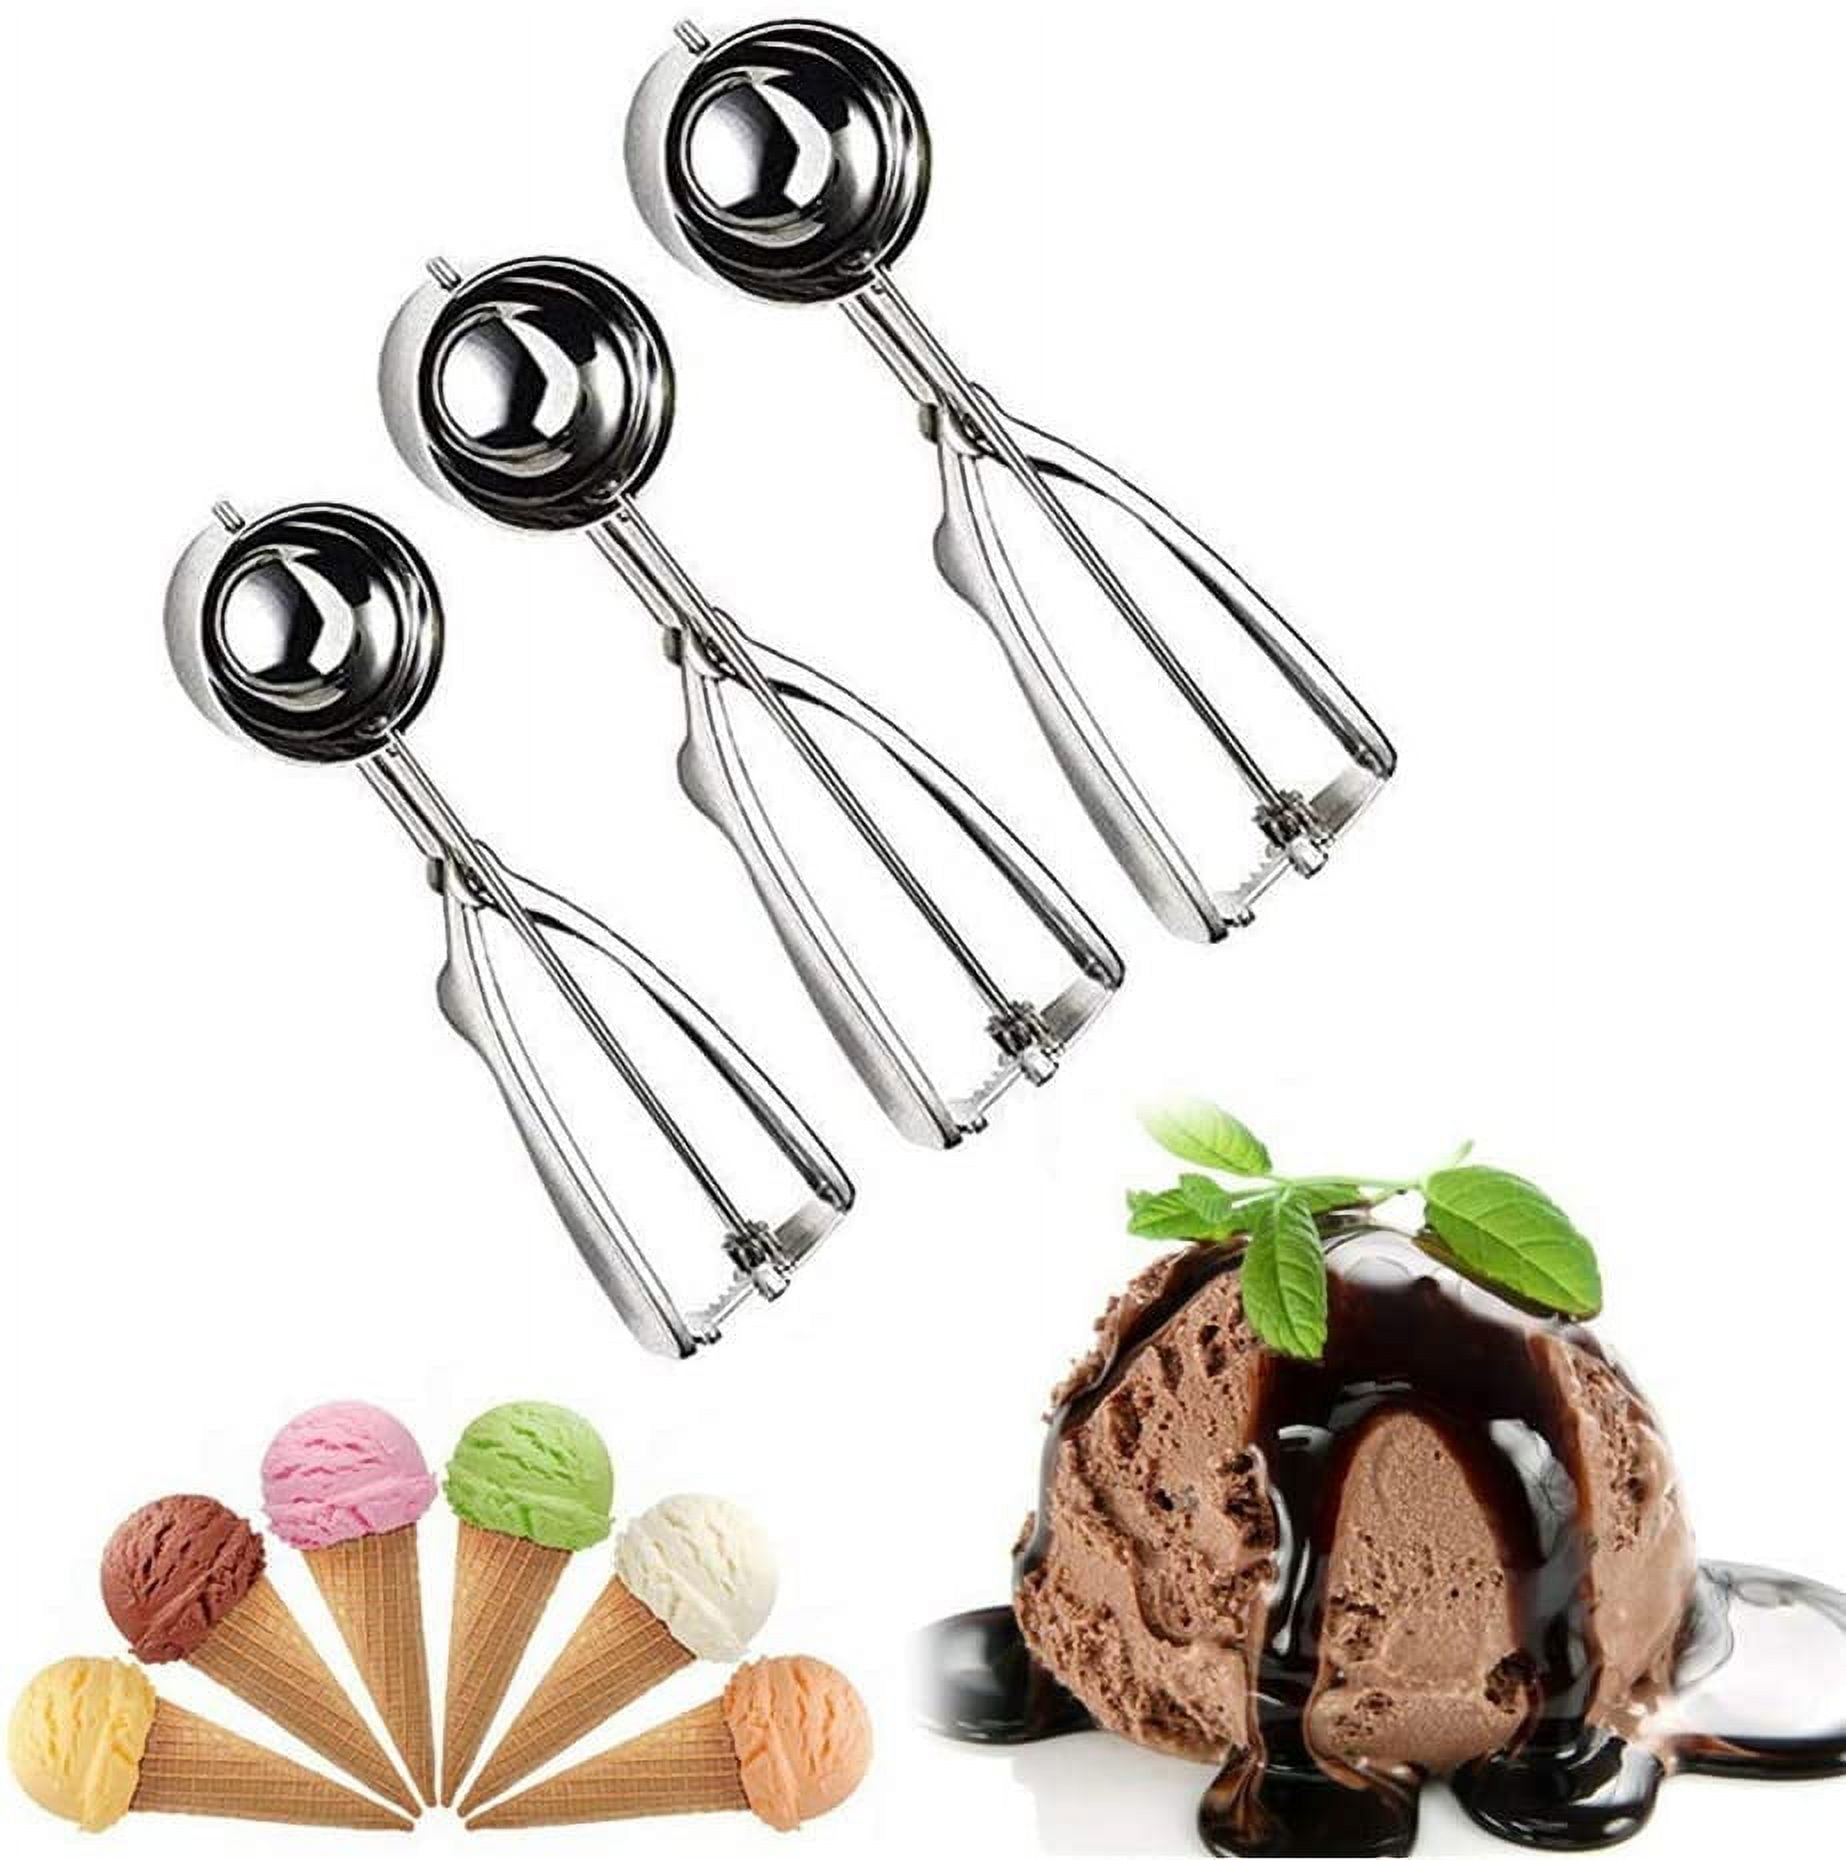  Cookie Scoop Set, Include 1 Tablespoon/ 2 Tablespoon/ 3  Tablespoon, 3PCS Cookie Scoops for Baking, Portion Scoop, Ice Cream Scoop  With Trigger Release, Made of 18/8 Stainless Steel: Home & Kitchen